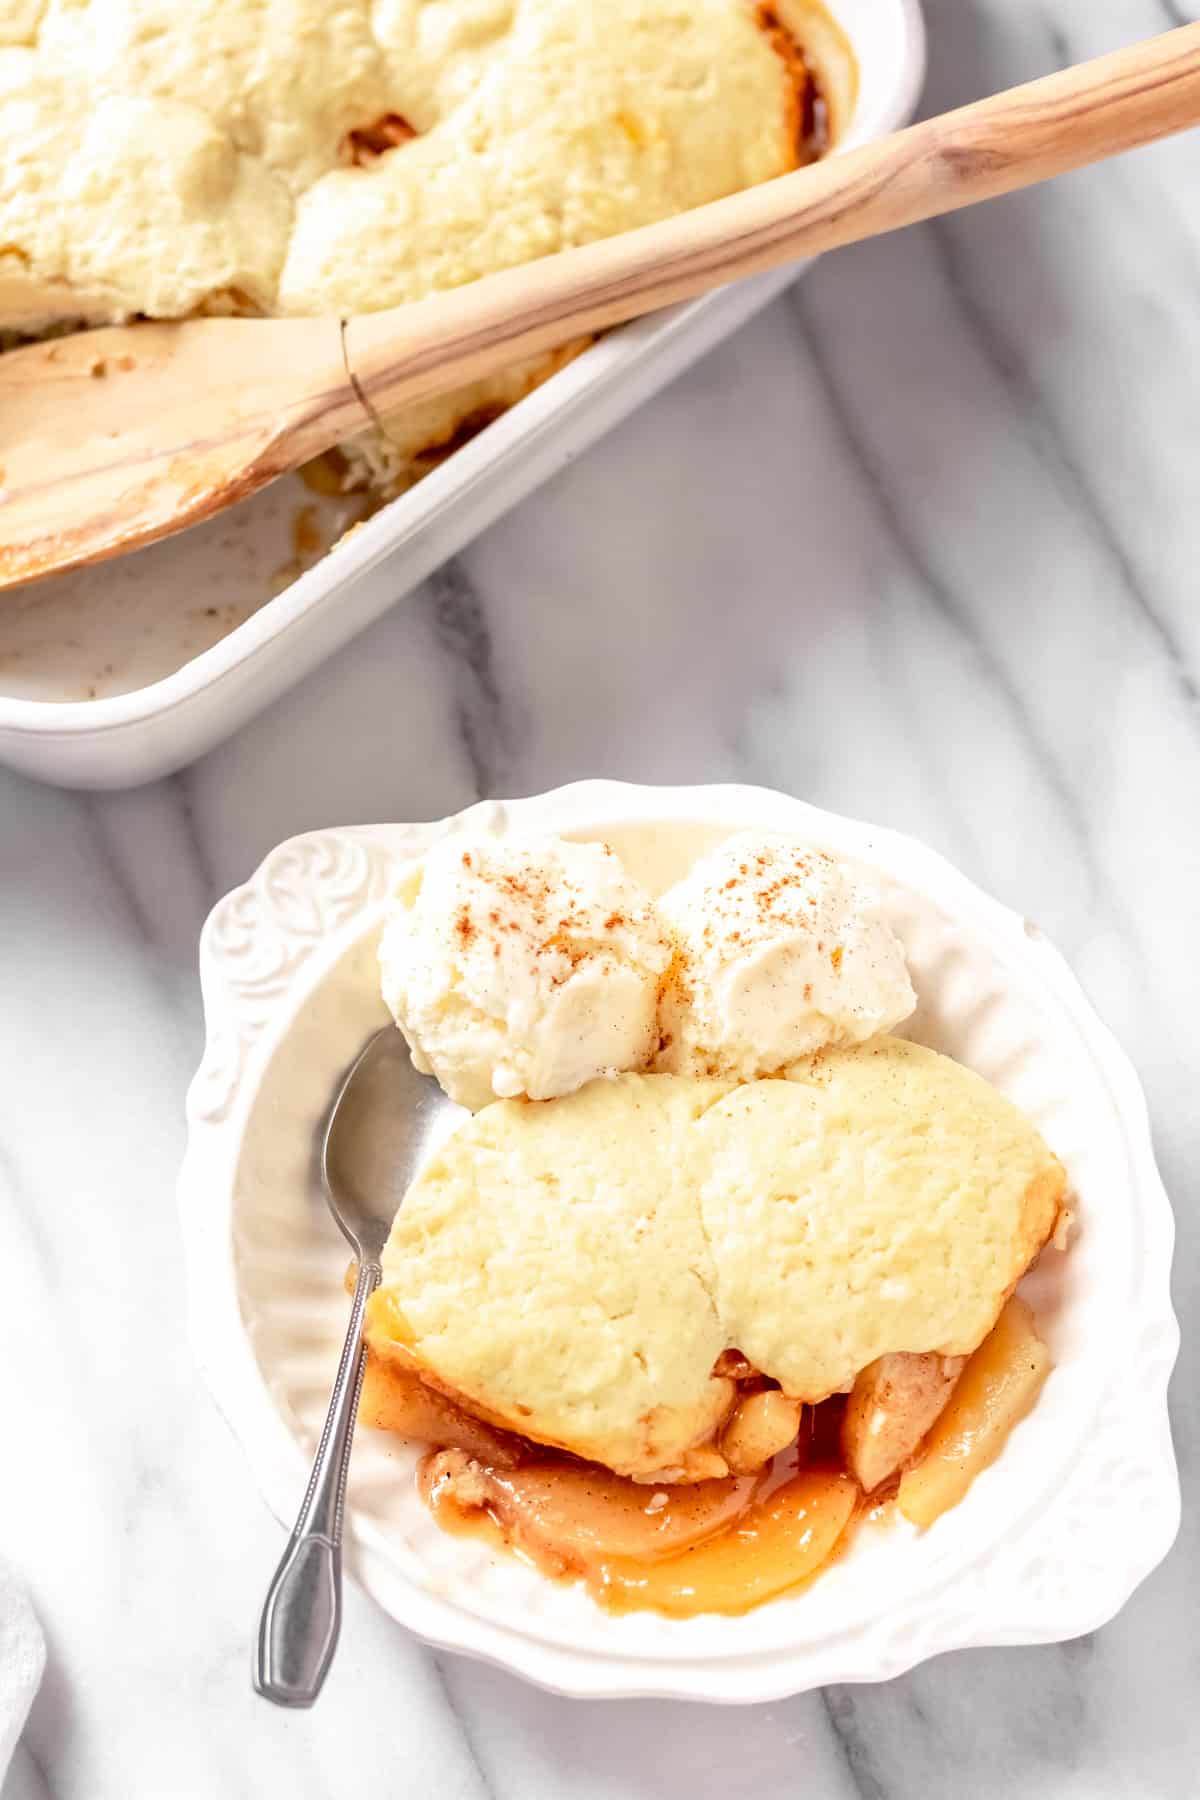 Pear cobbler and ice cream in a bowl with a spoon and a baking dish partially showing in the background